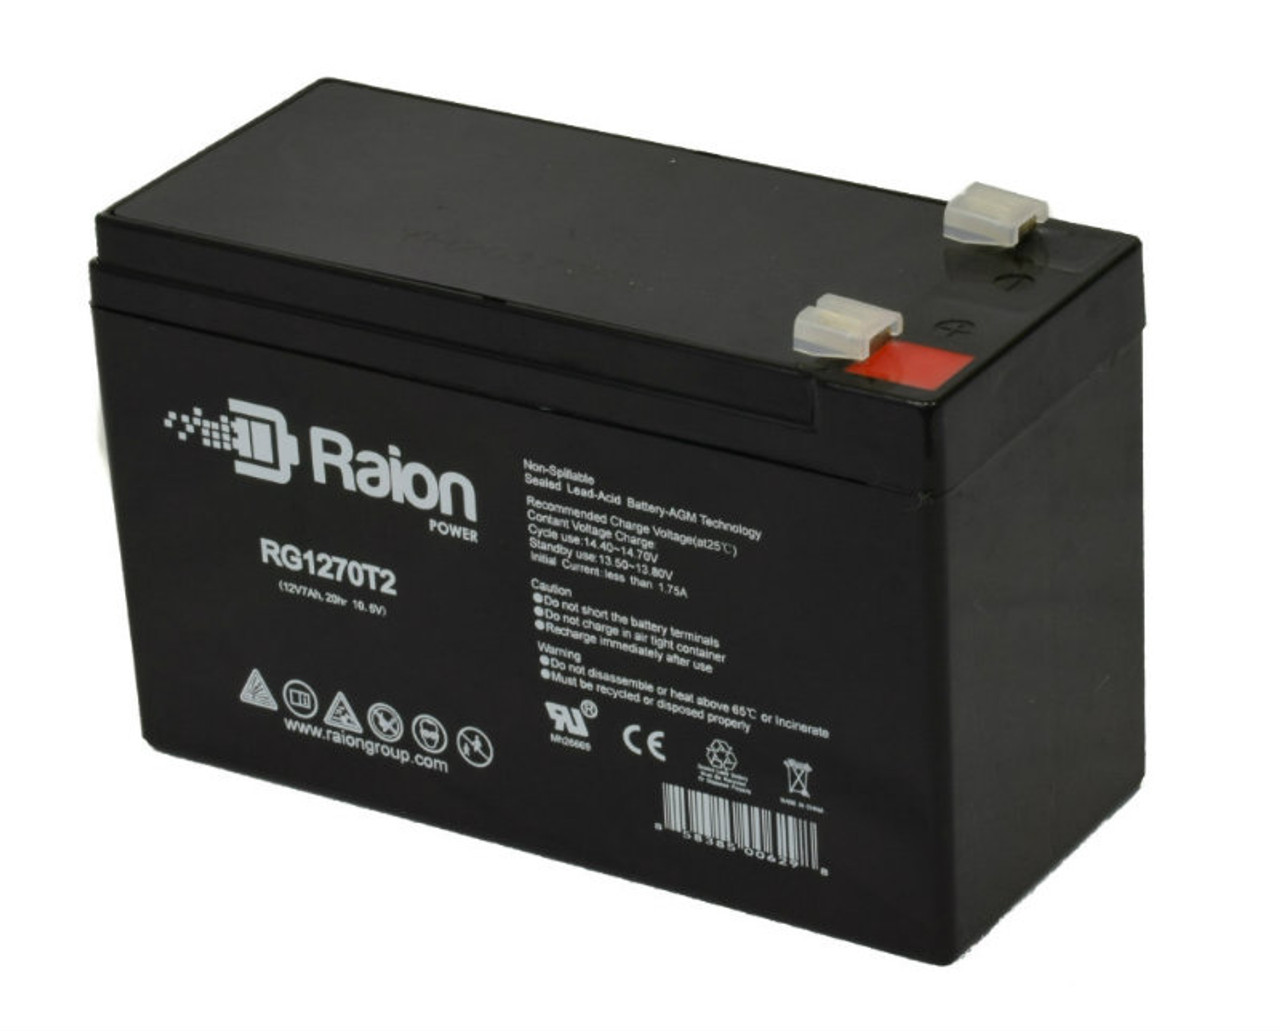 Raion Power RG1270T1 12V 7Ah Non-Spillable Replacement Battery for Europower EP 7.2-12